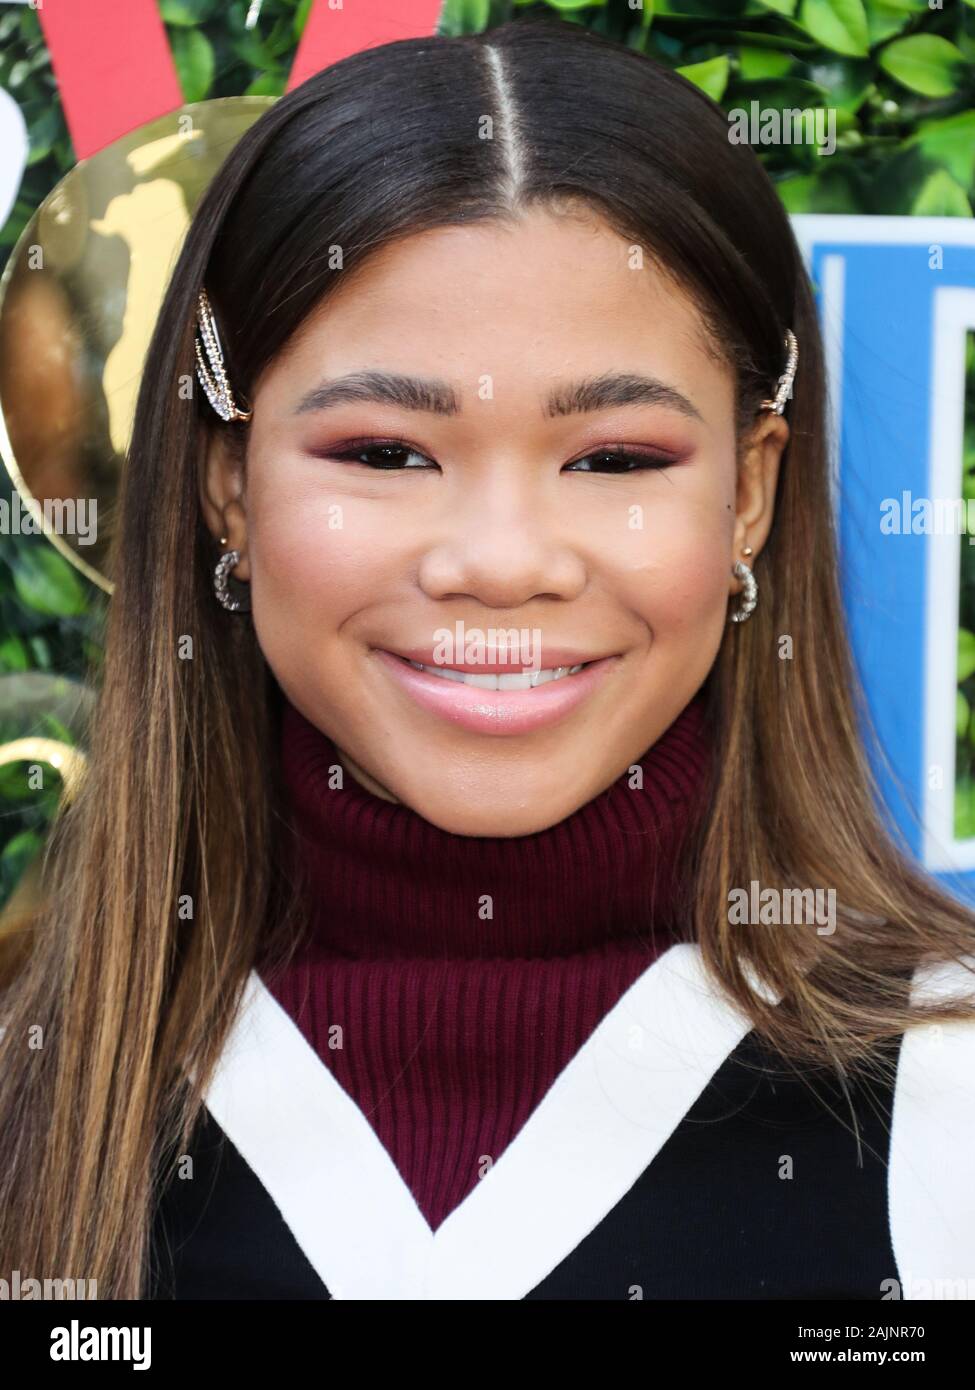 Beverly Hills, USA. 04th Jan, 2020. BEVERLY HILLS, LOS ANGELES, CALIFORNIA,  USA - JANUARY 04: Actress Storm Reid wearing Tommy Hilfiger x Zendaya  arrives at the 7th Annual Gold Meets Golden Event